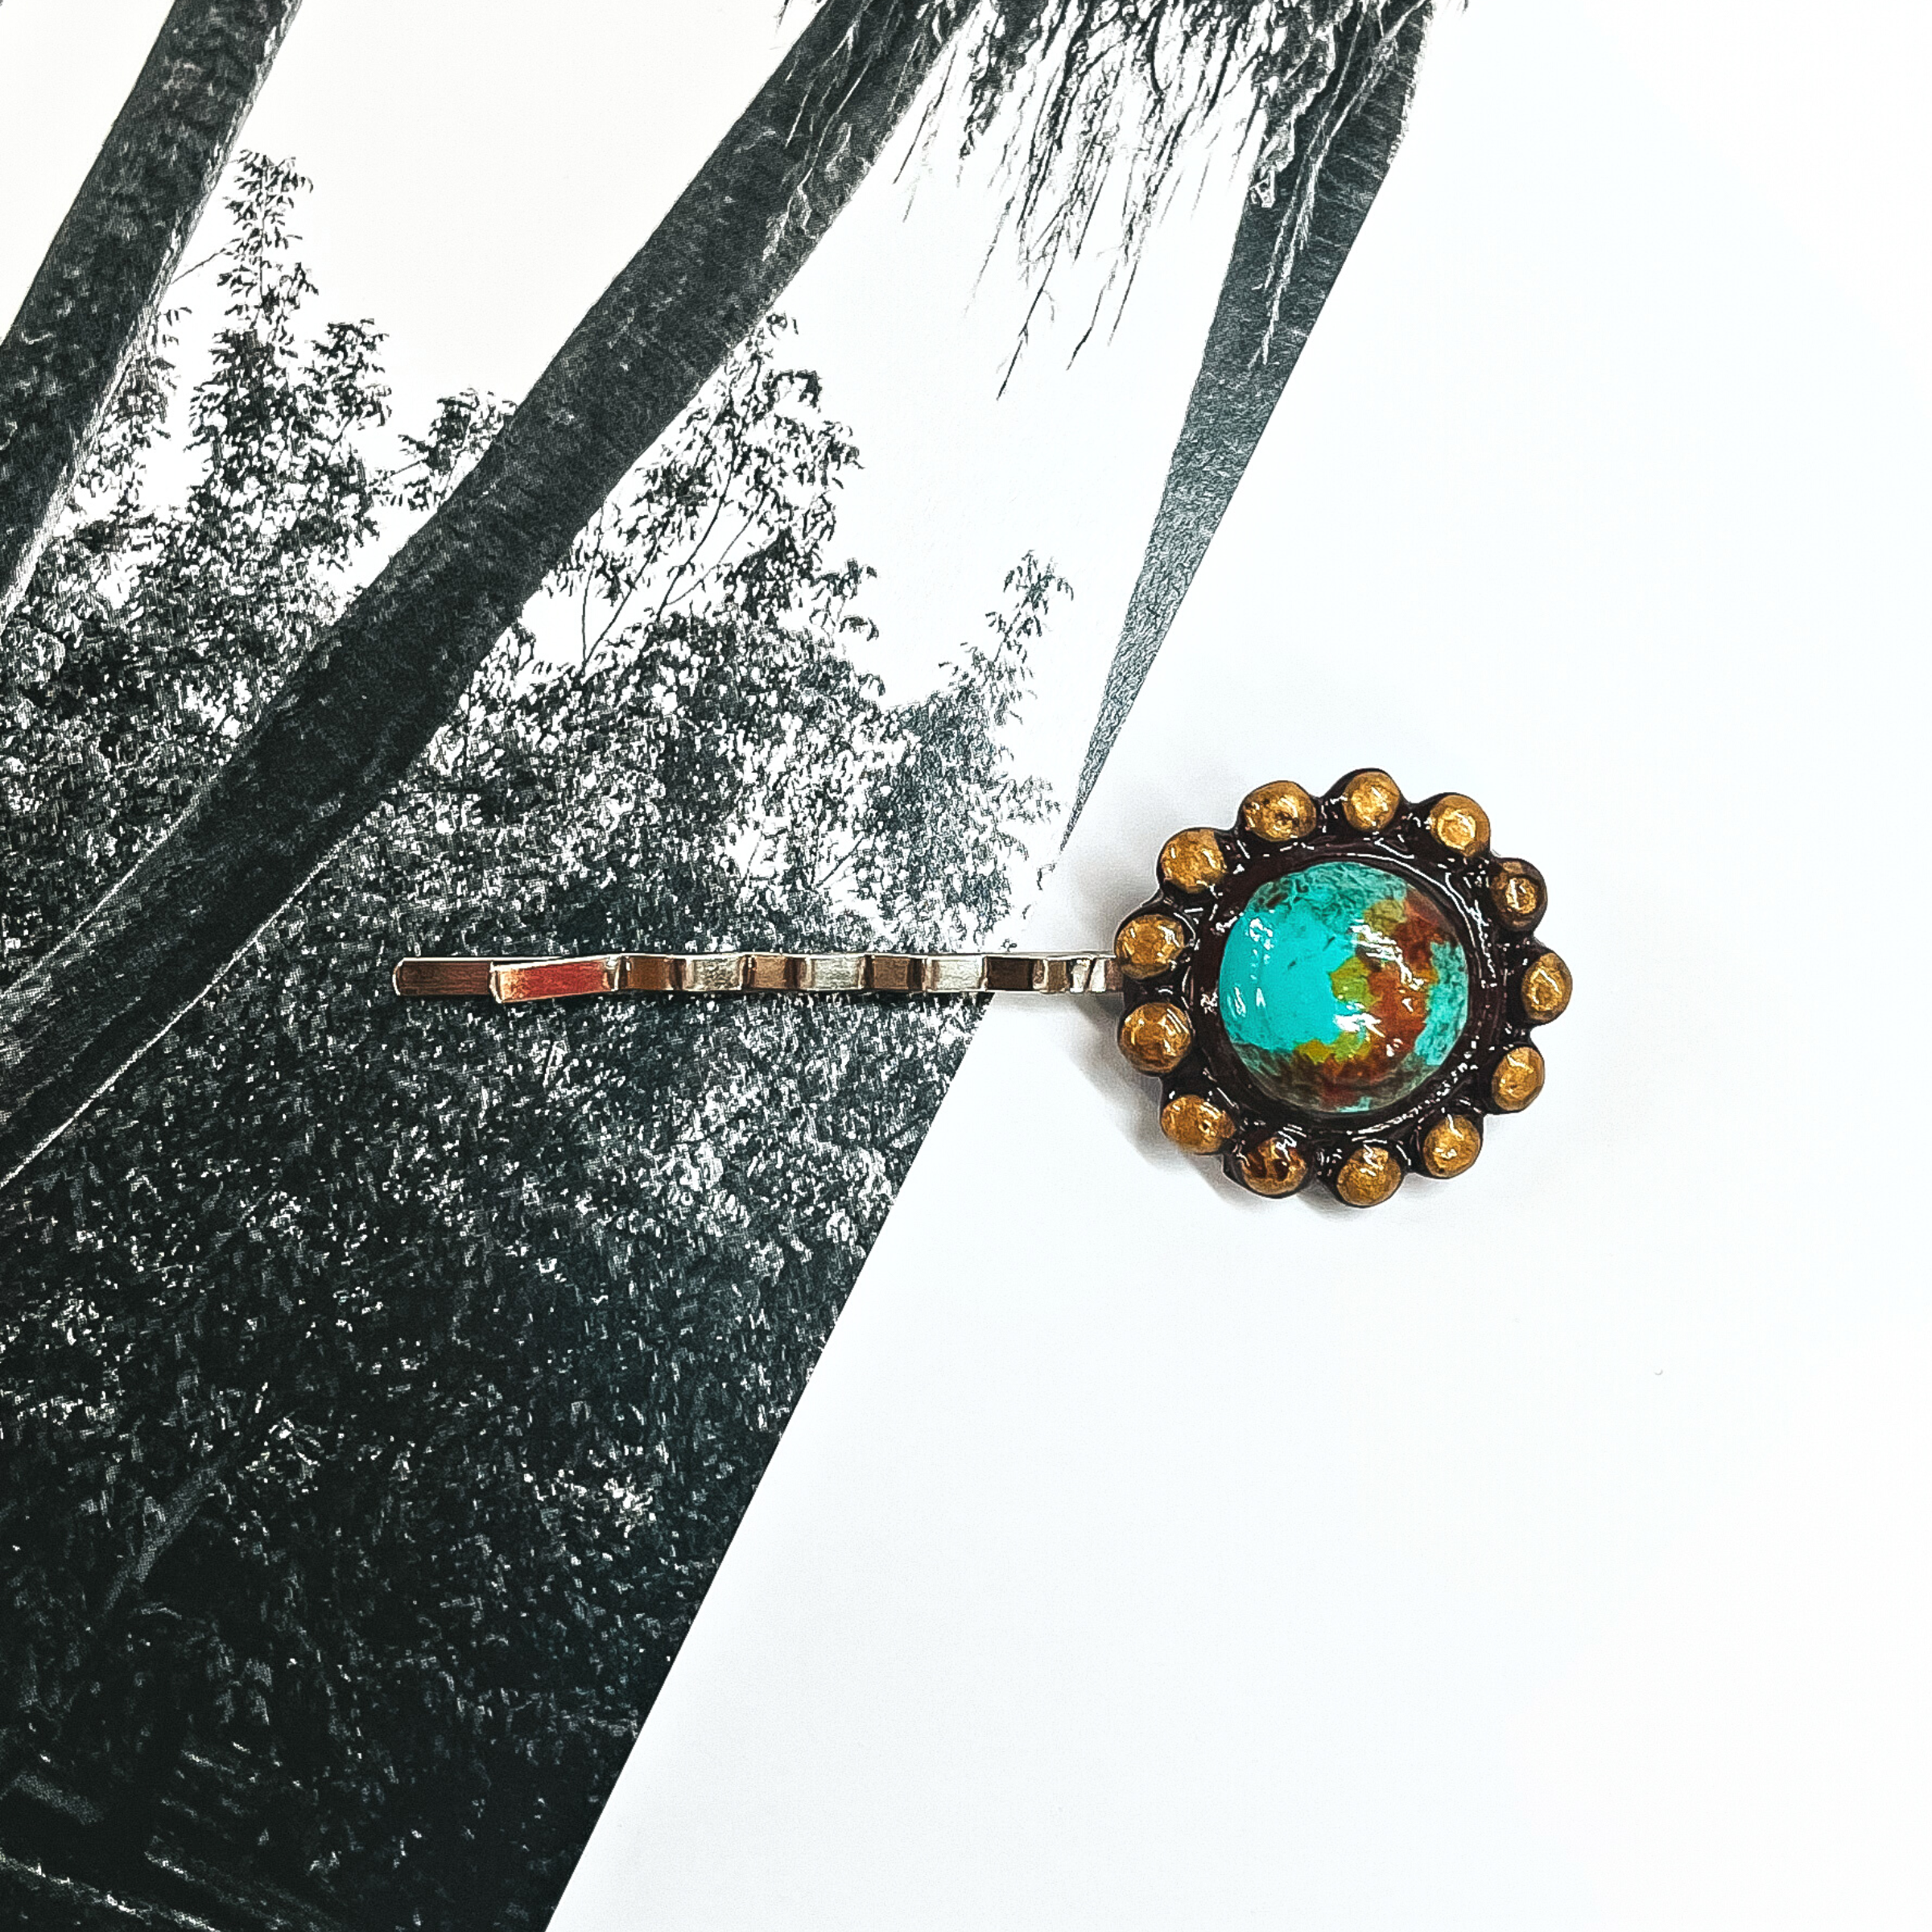 This is a silver tone bobby pin with a clay piece at the end of the pin. It is a circle with rounded ridges, the circle is teal/turquoise and brown. The rounded ridges are painted gold. This bobby pin is laying on a black and white outdoor book page,